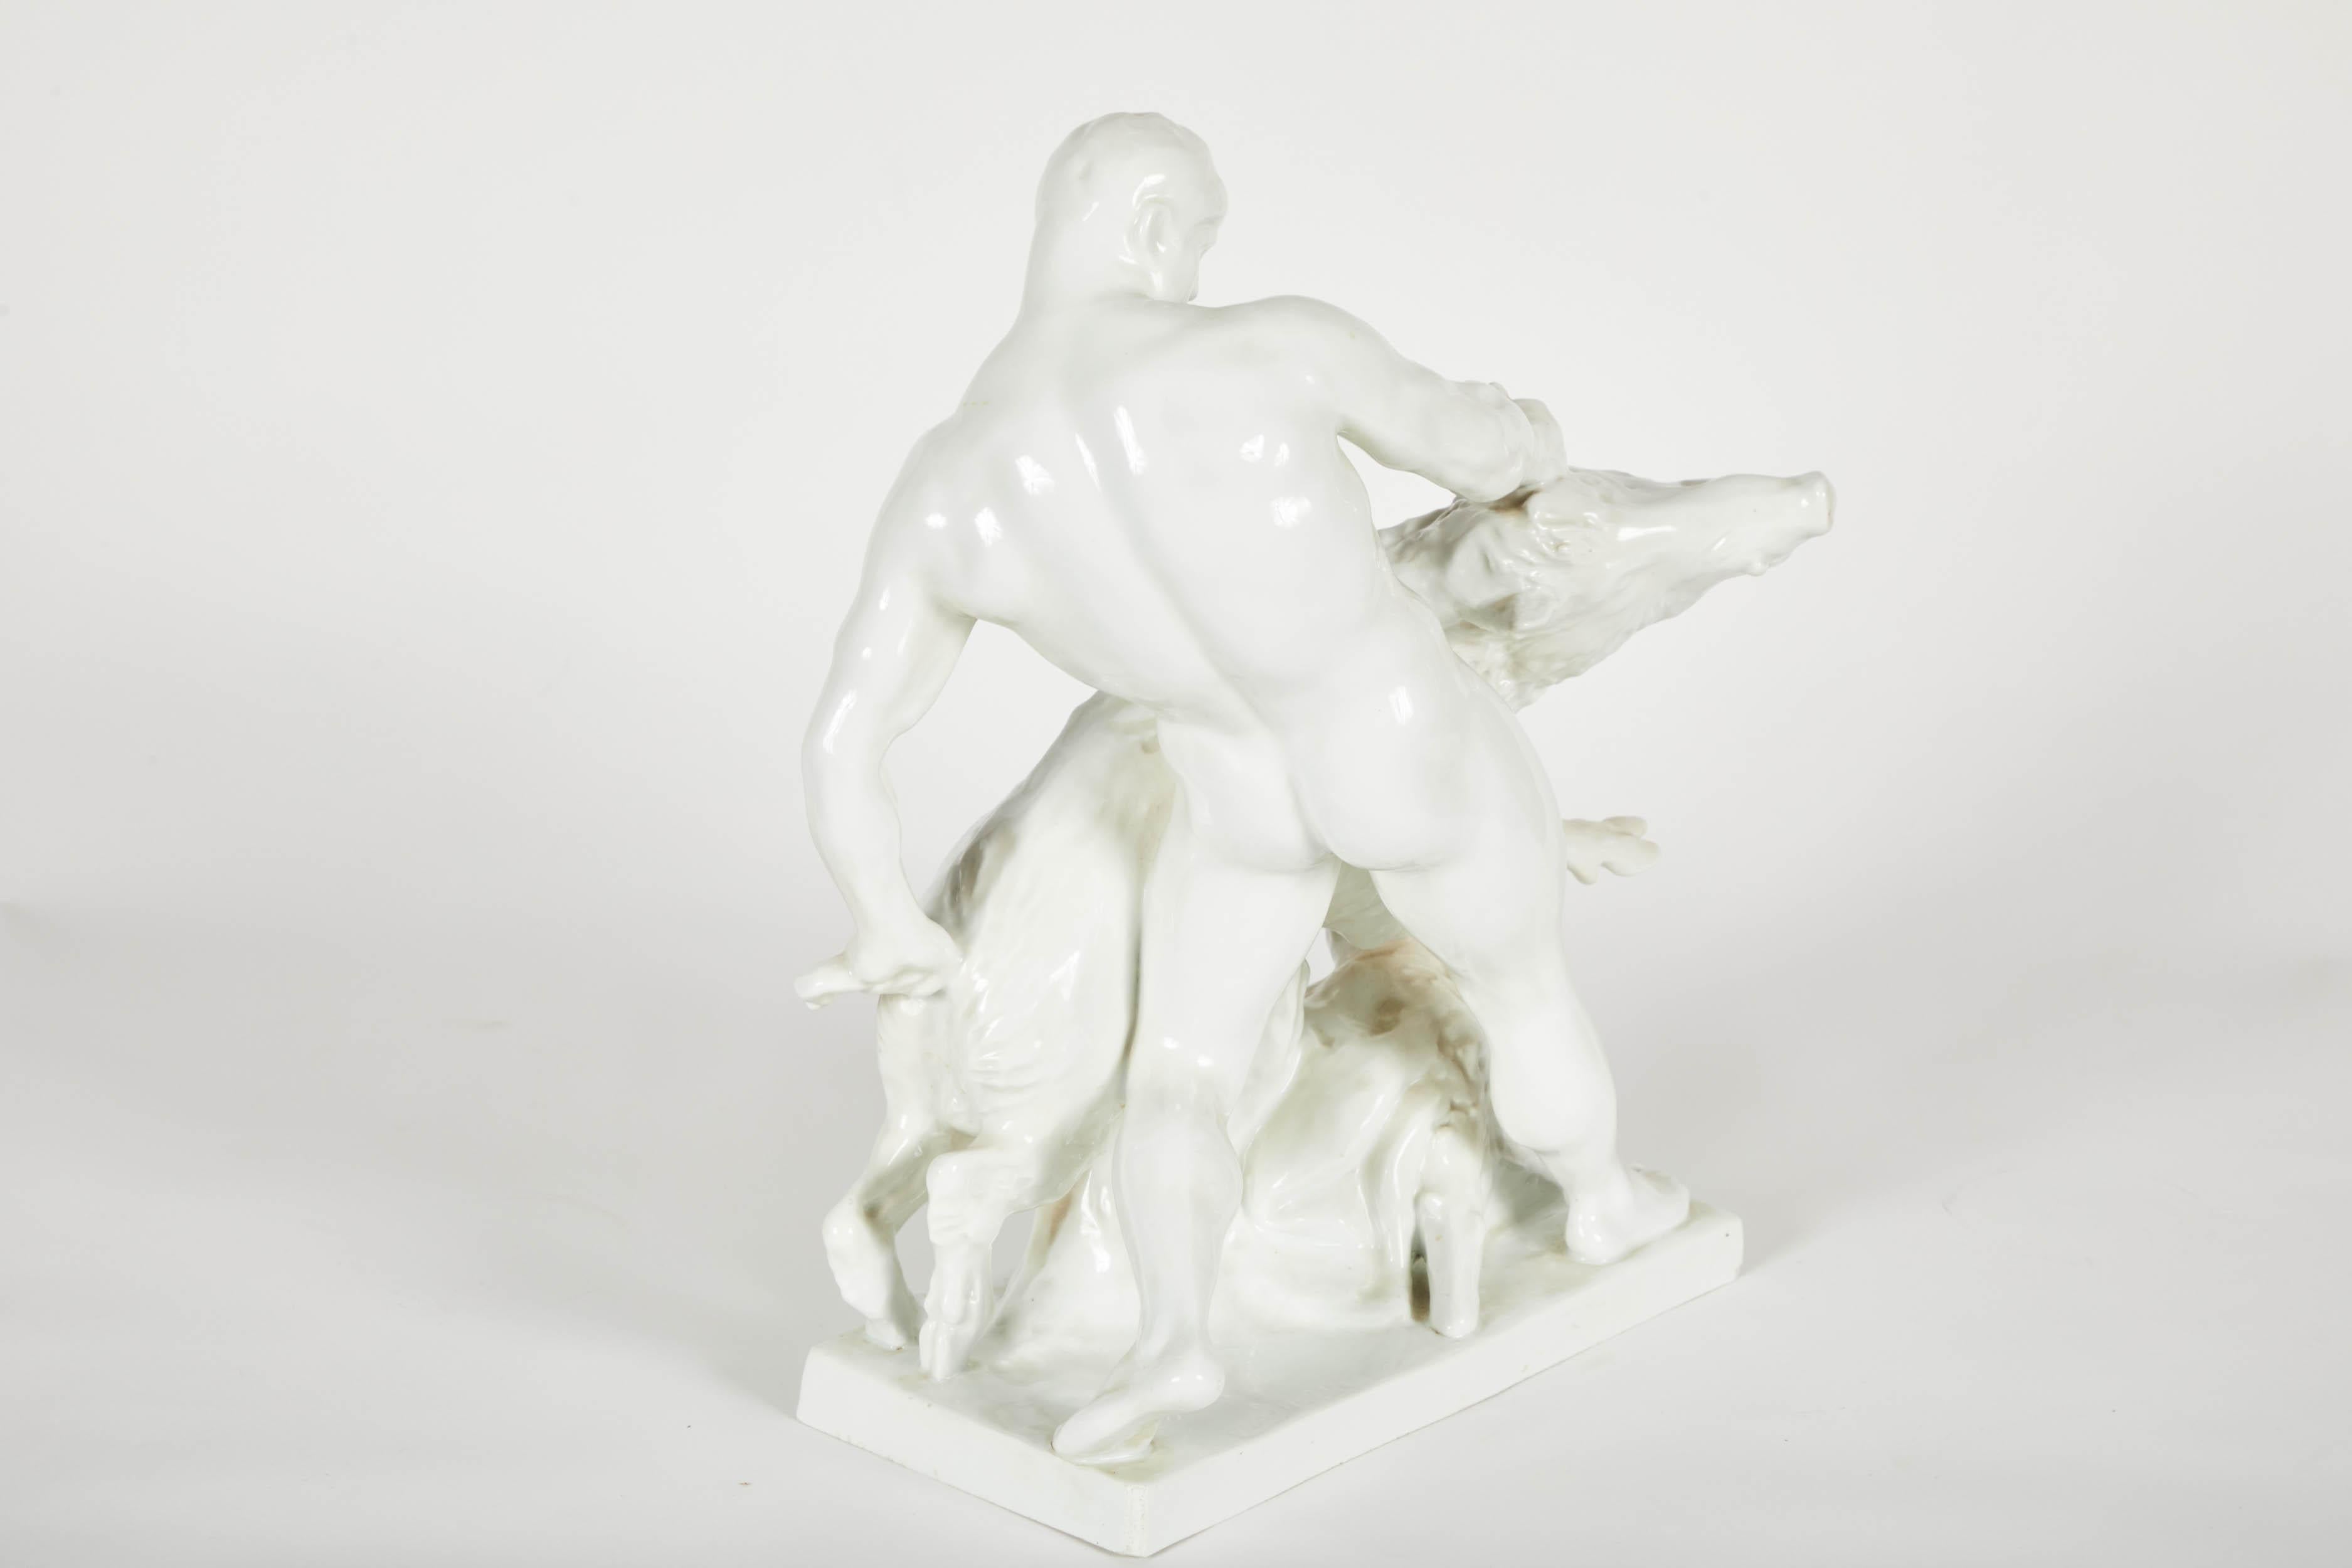 White Porcelain Sculpture of Man Wrestling Boar In Good Condition For Sale In Pasadena, CA